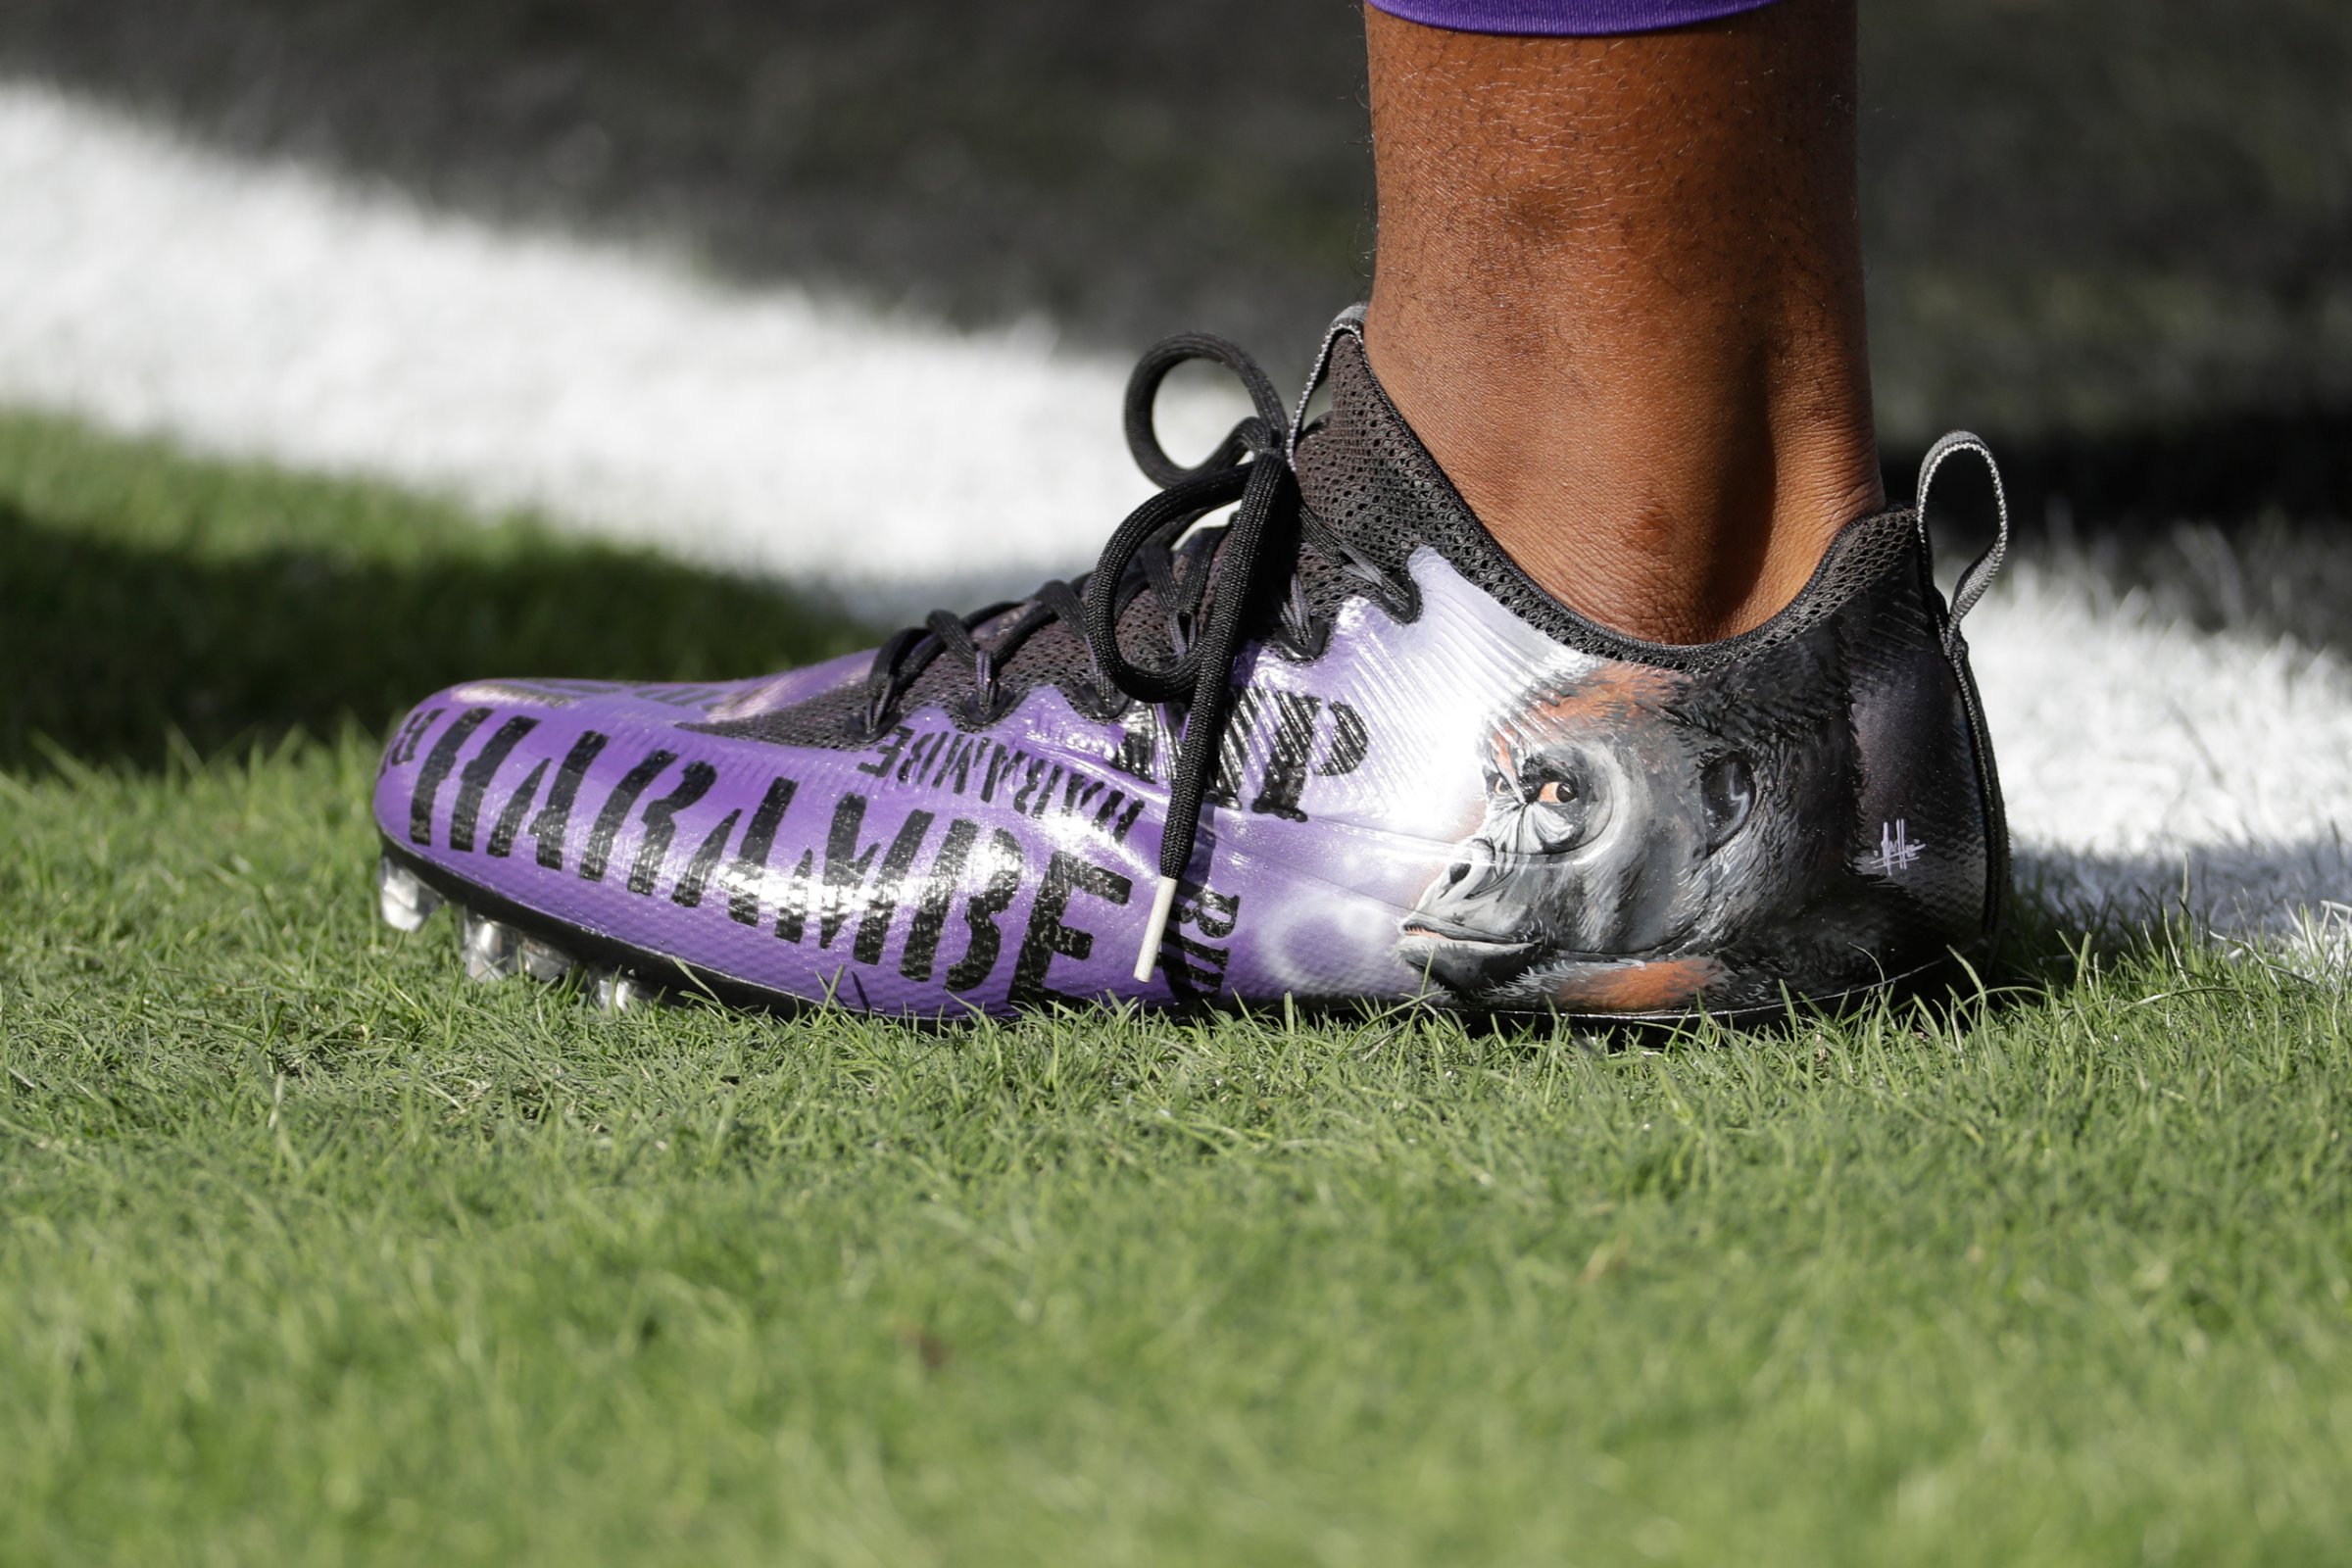 Minnesota Vikings' Jerick McKinnon wears cleats with images of Harambe during warm ups before an NFL football game against the Philadelphia Eagles, Sunday, Oct. 23, 2016, in Philadelphia. (AP Photo/Chris Szagola)